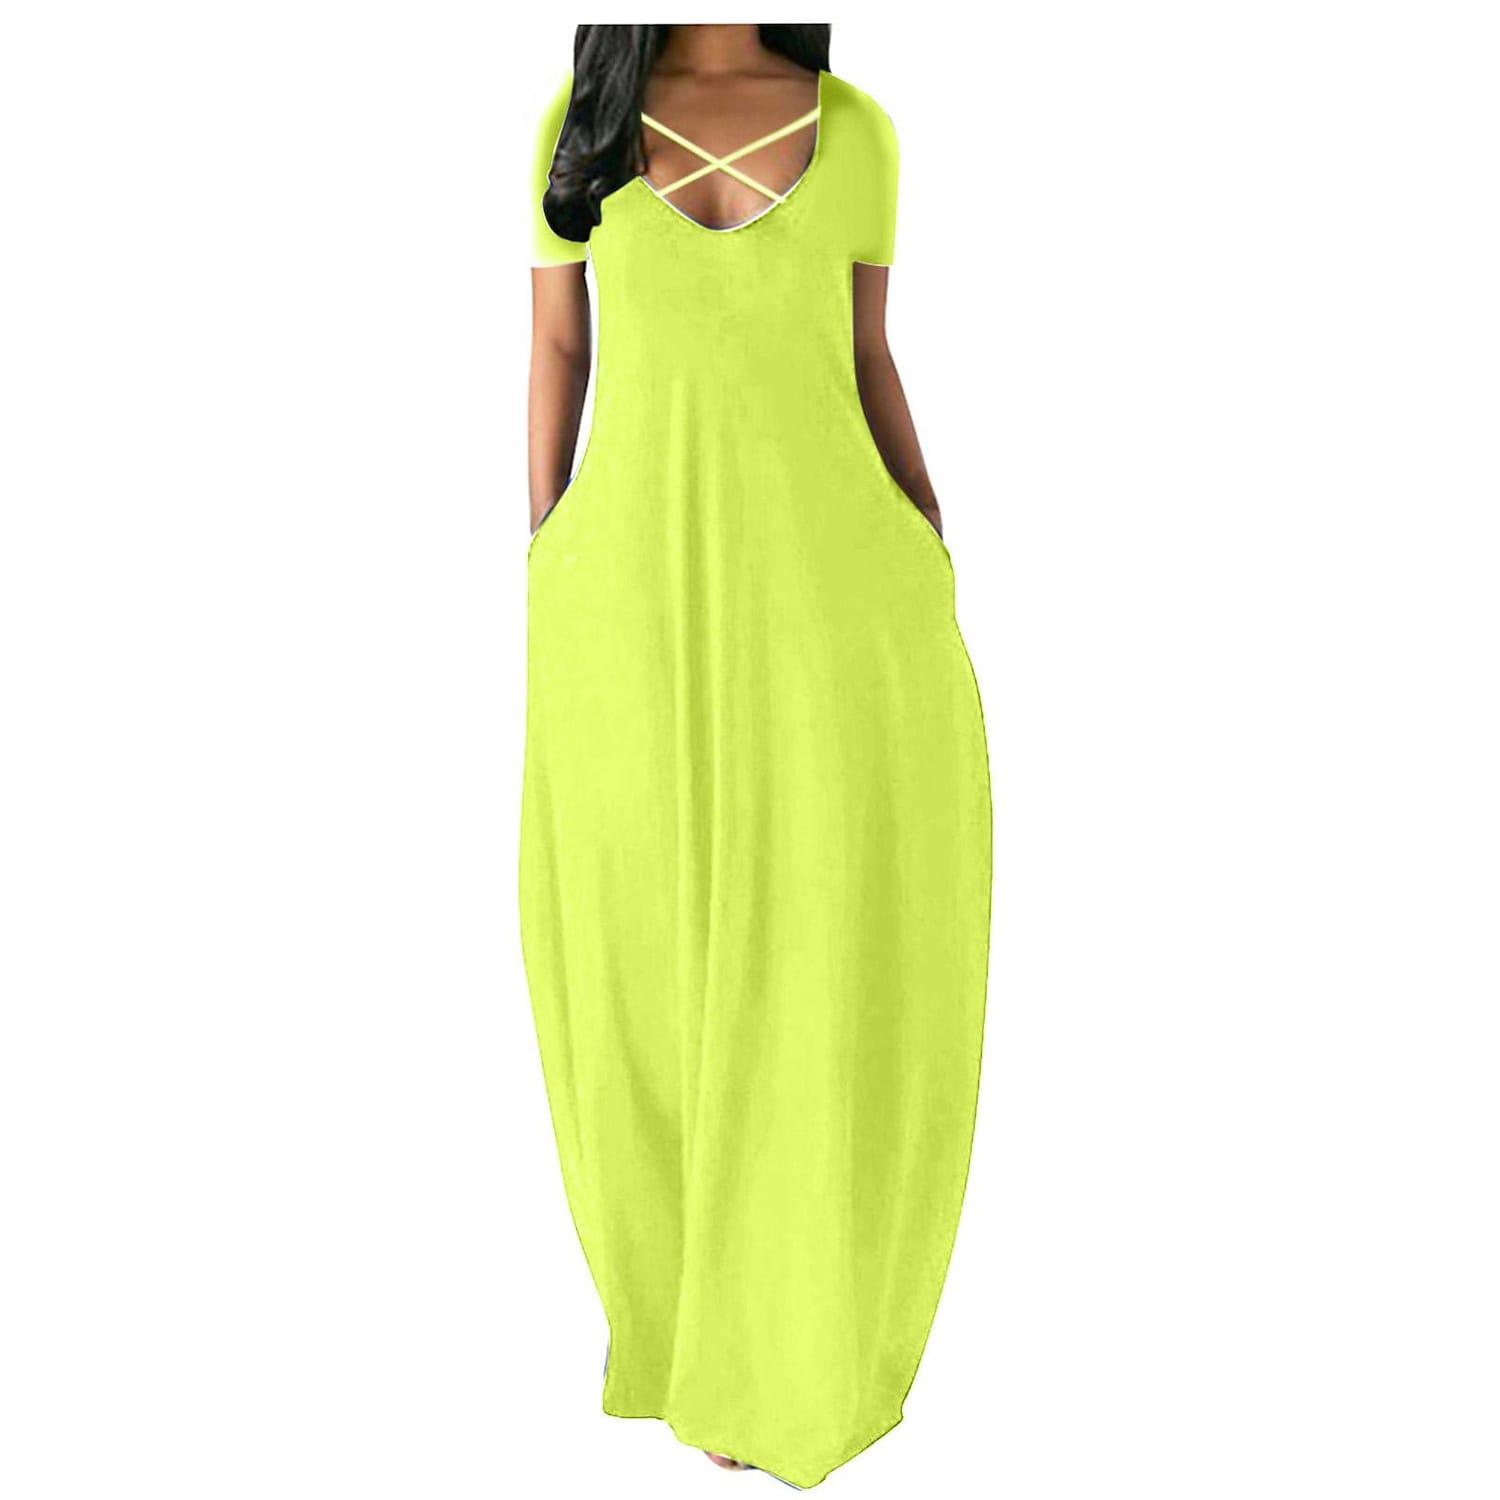 Women's solid color pocket stitching backless dress spot